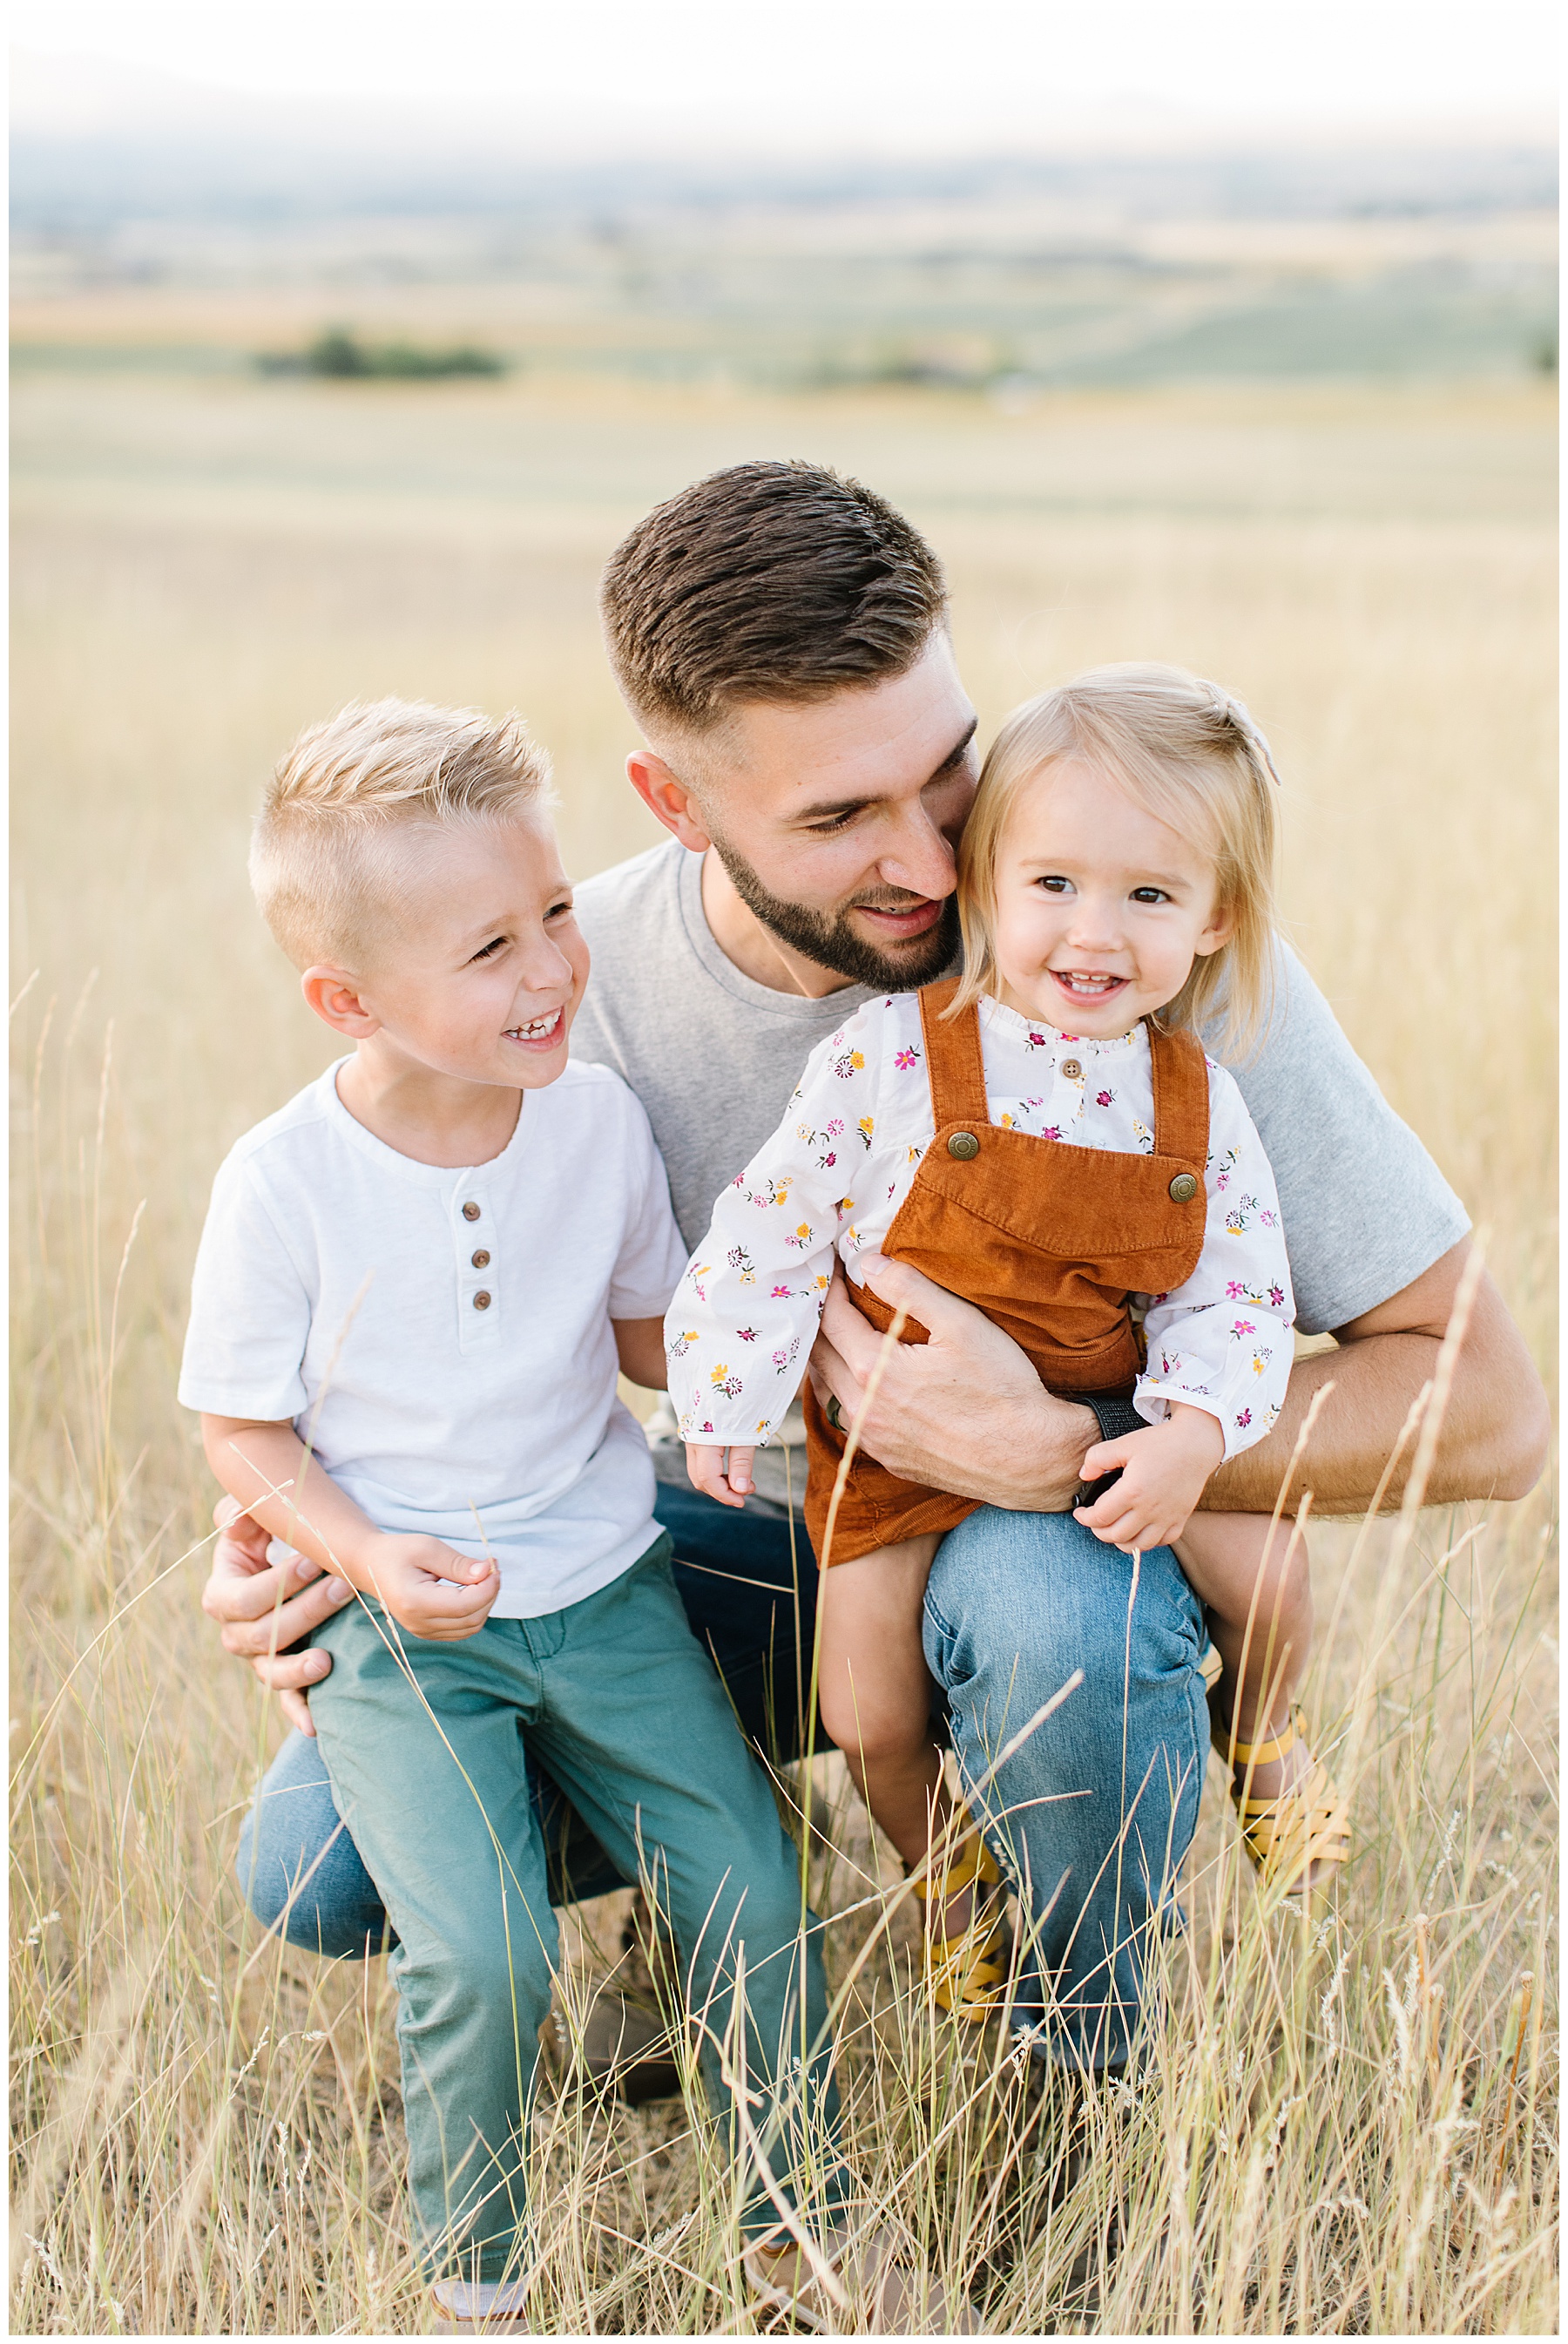 Cache Valley Family Photographer